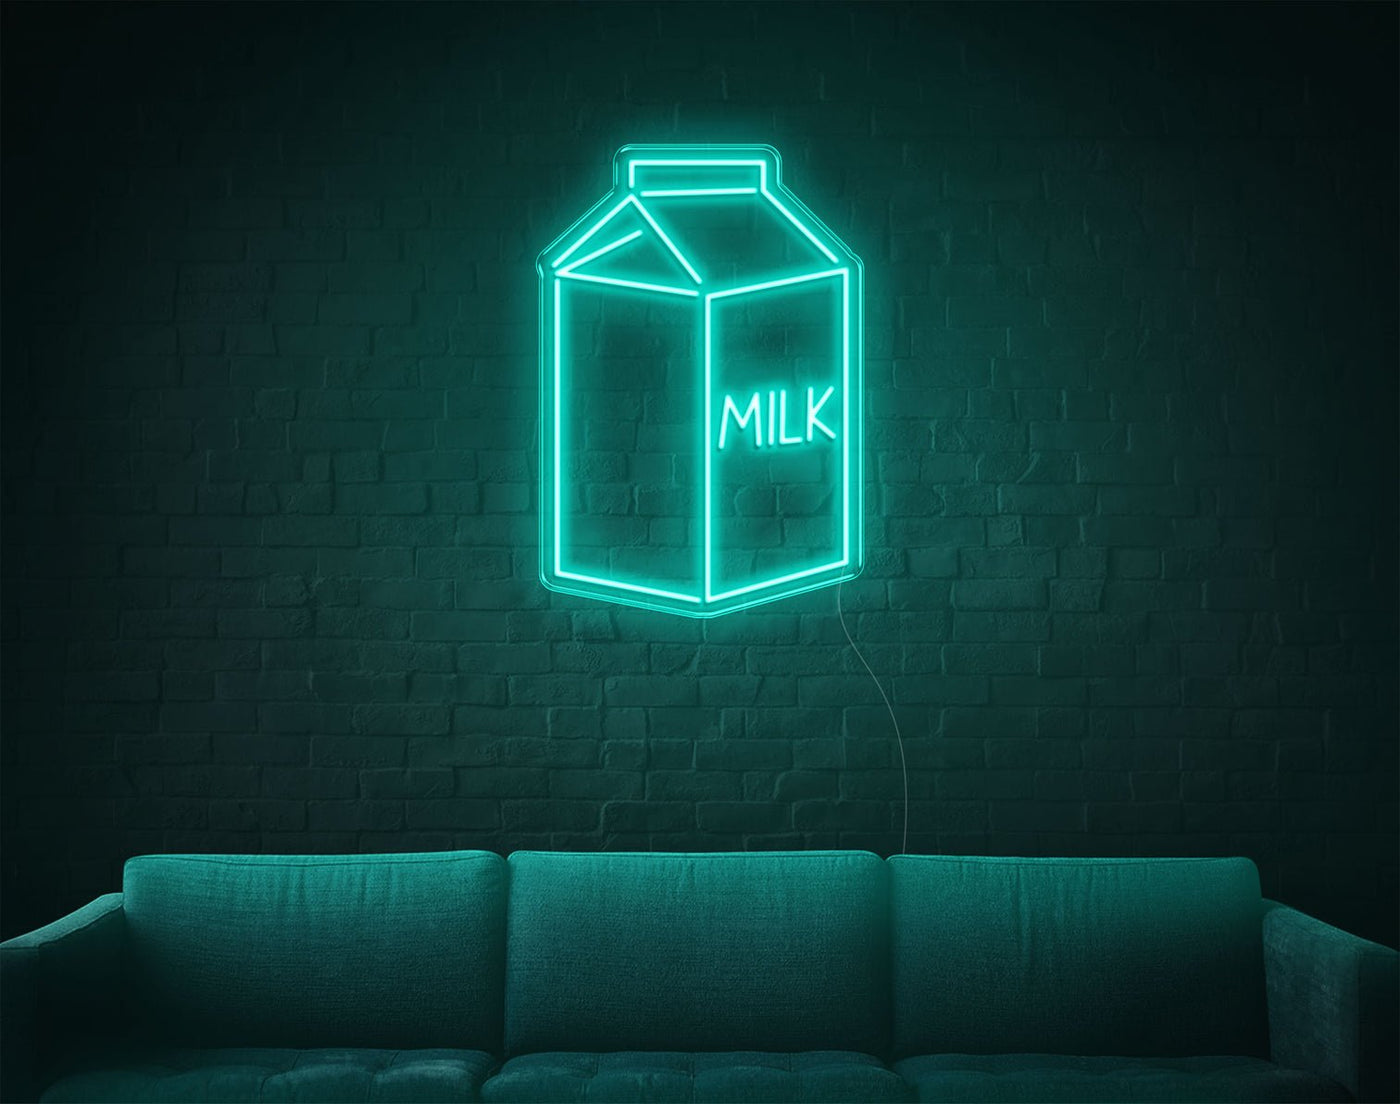 Milk LED Neon Sign - 26inch x 18inchTurquoise